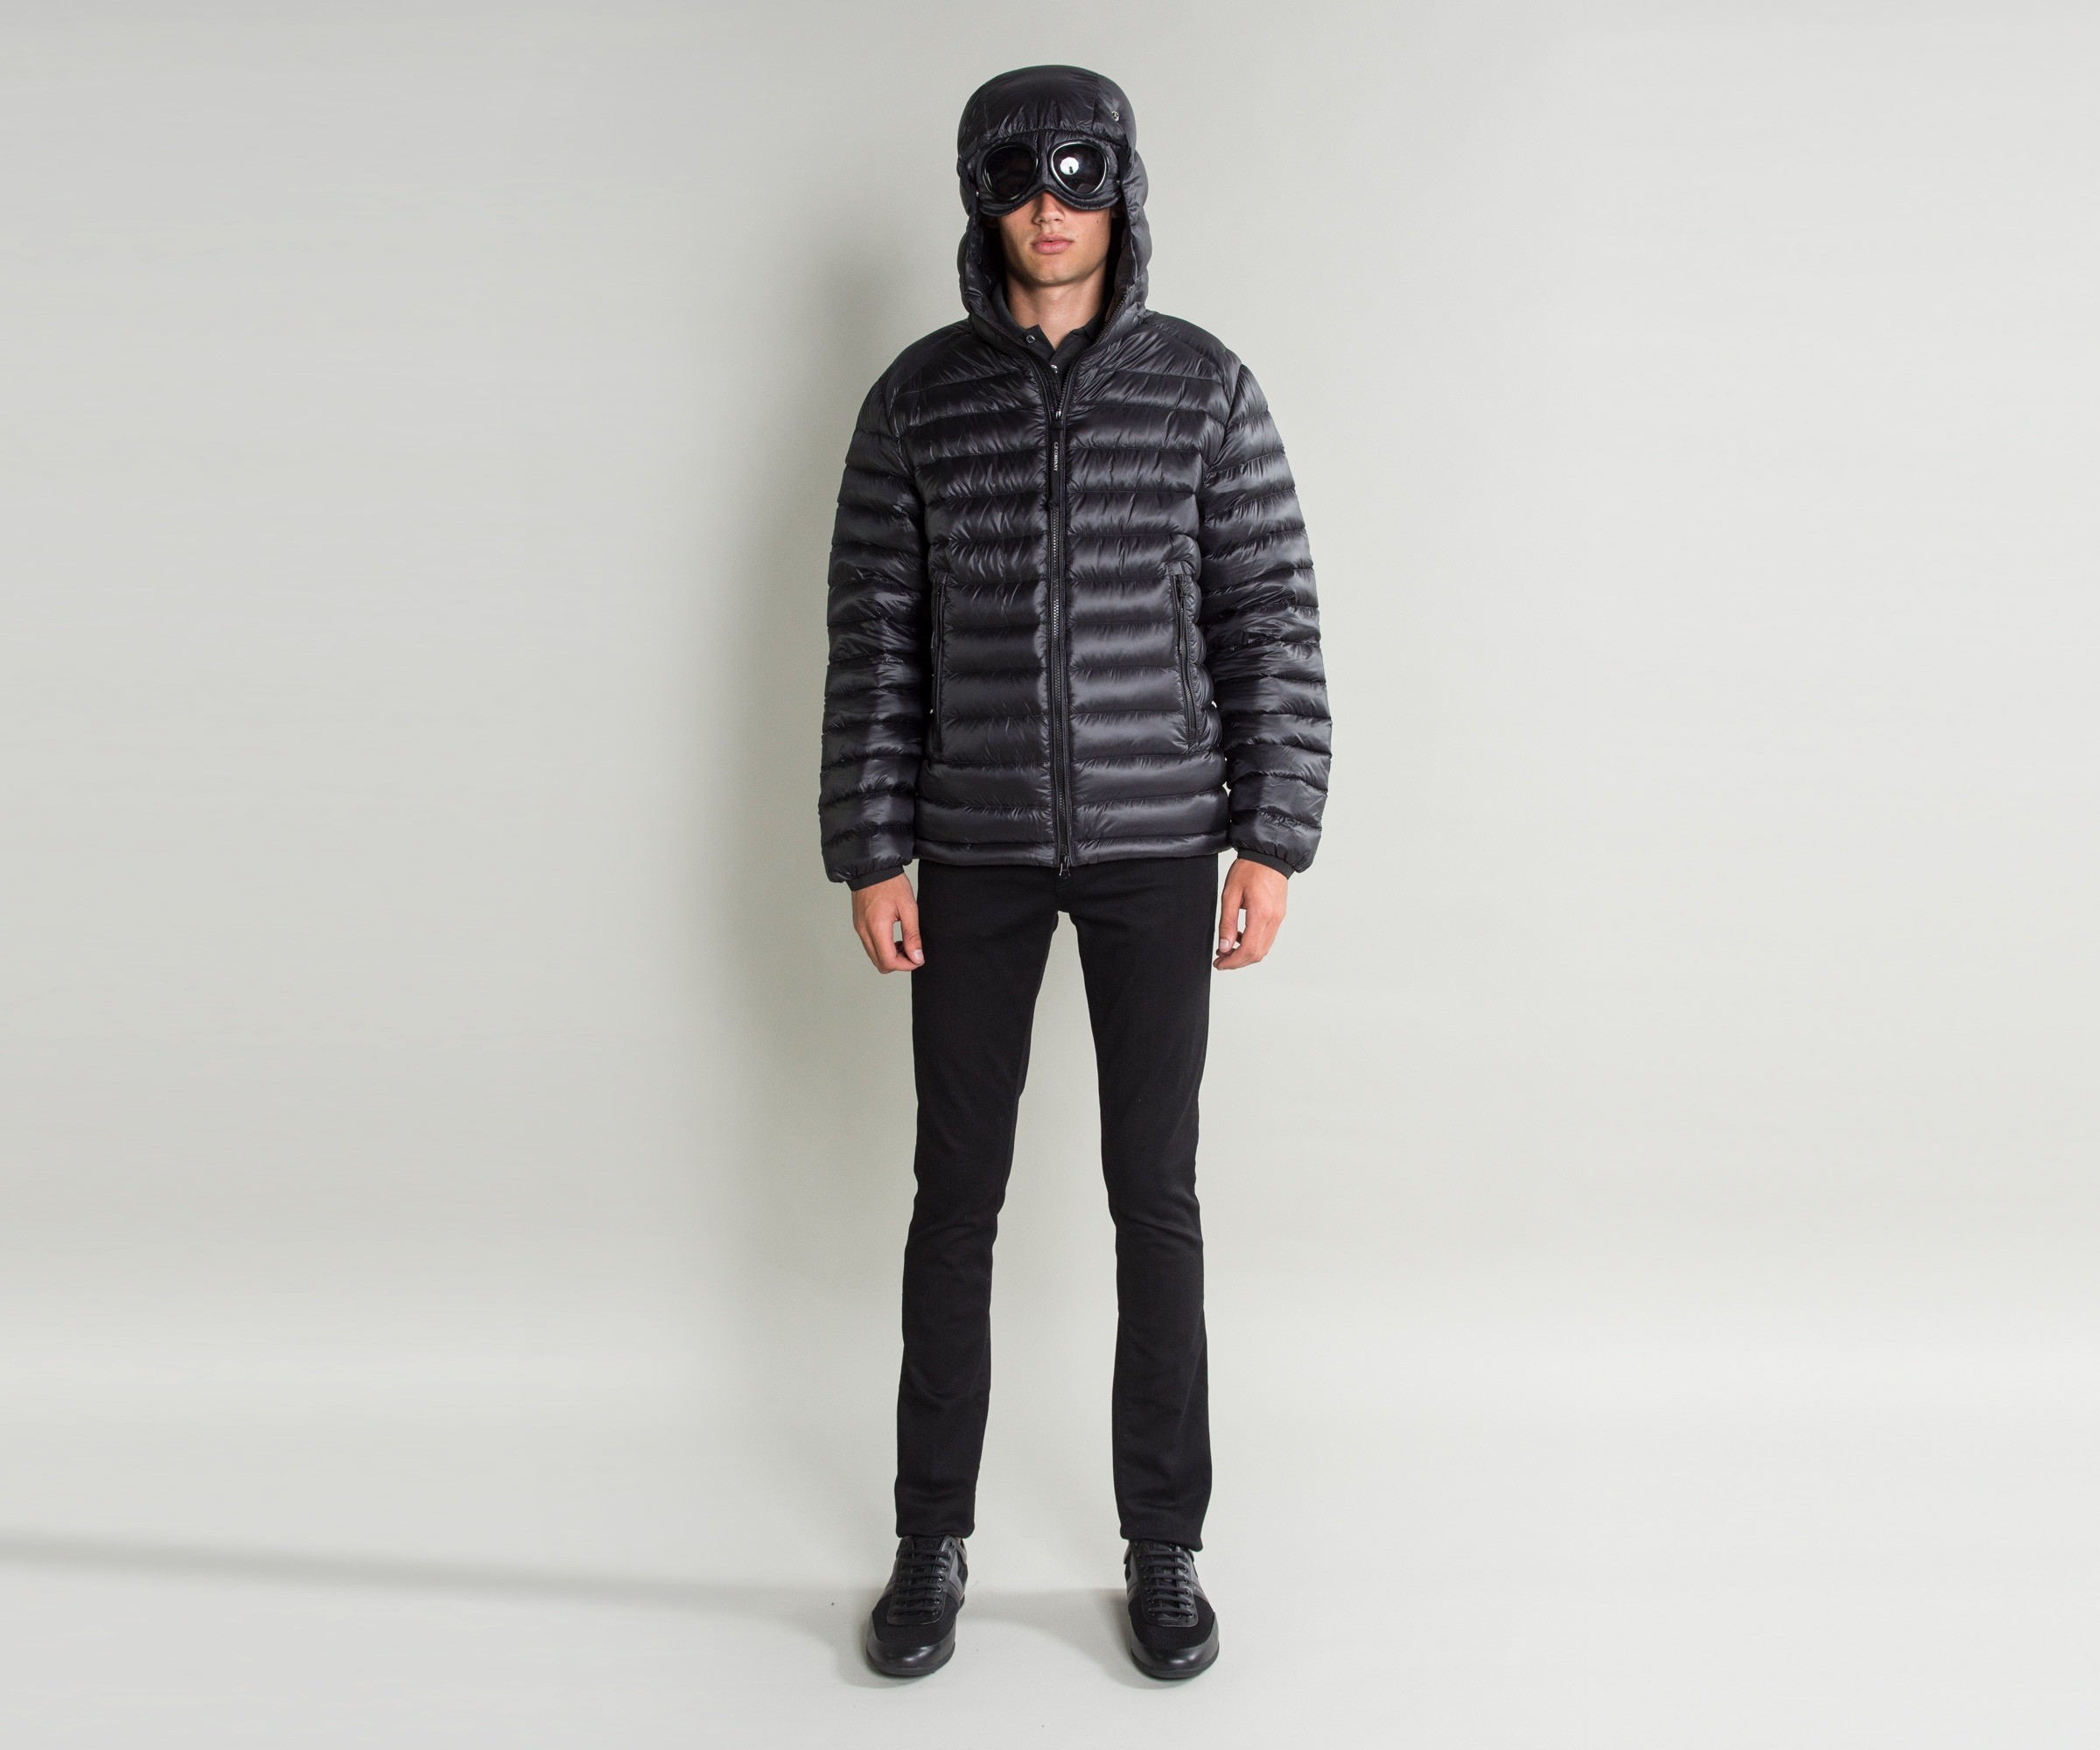 CP Company C.P. Company Short 'D.D. Shell' Down Jacket With Goggle Hood  Black